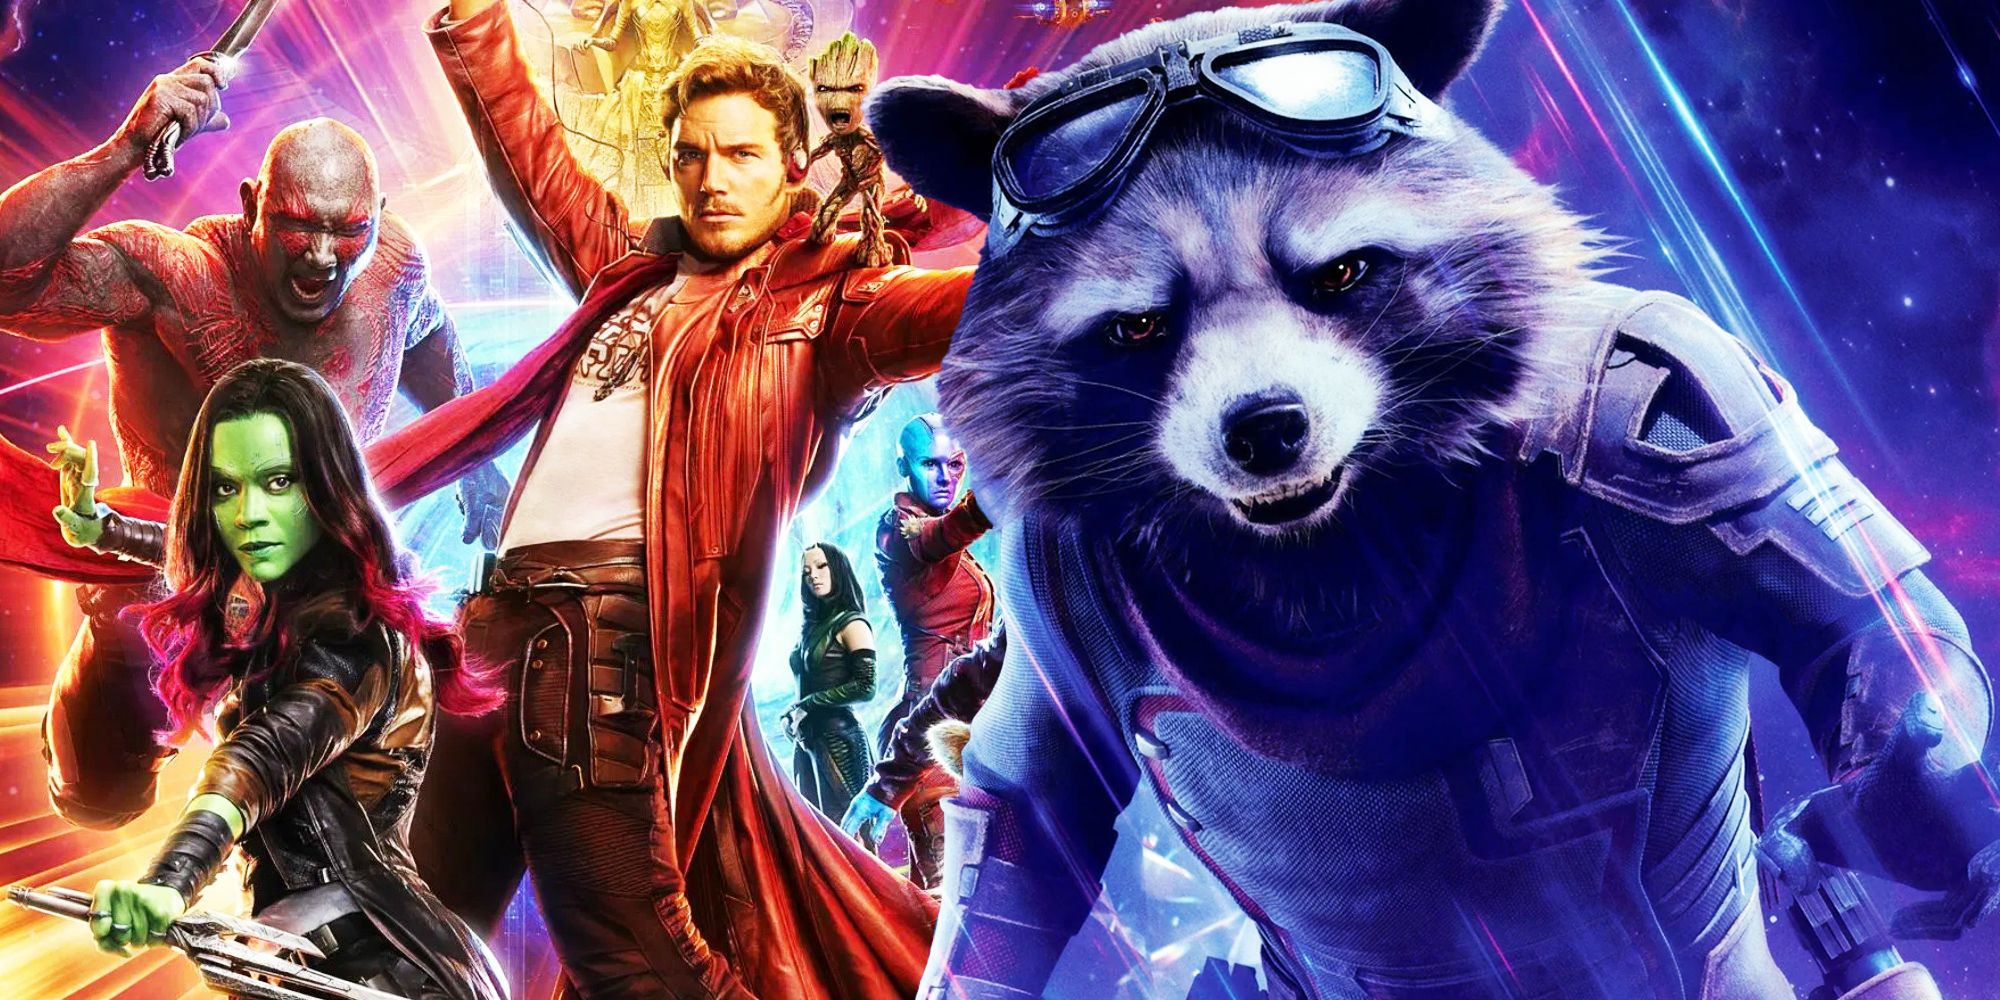 Rocket Raccoon and the Guardians of the Galaxy